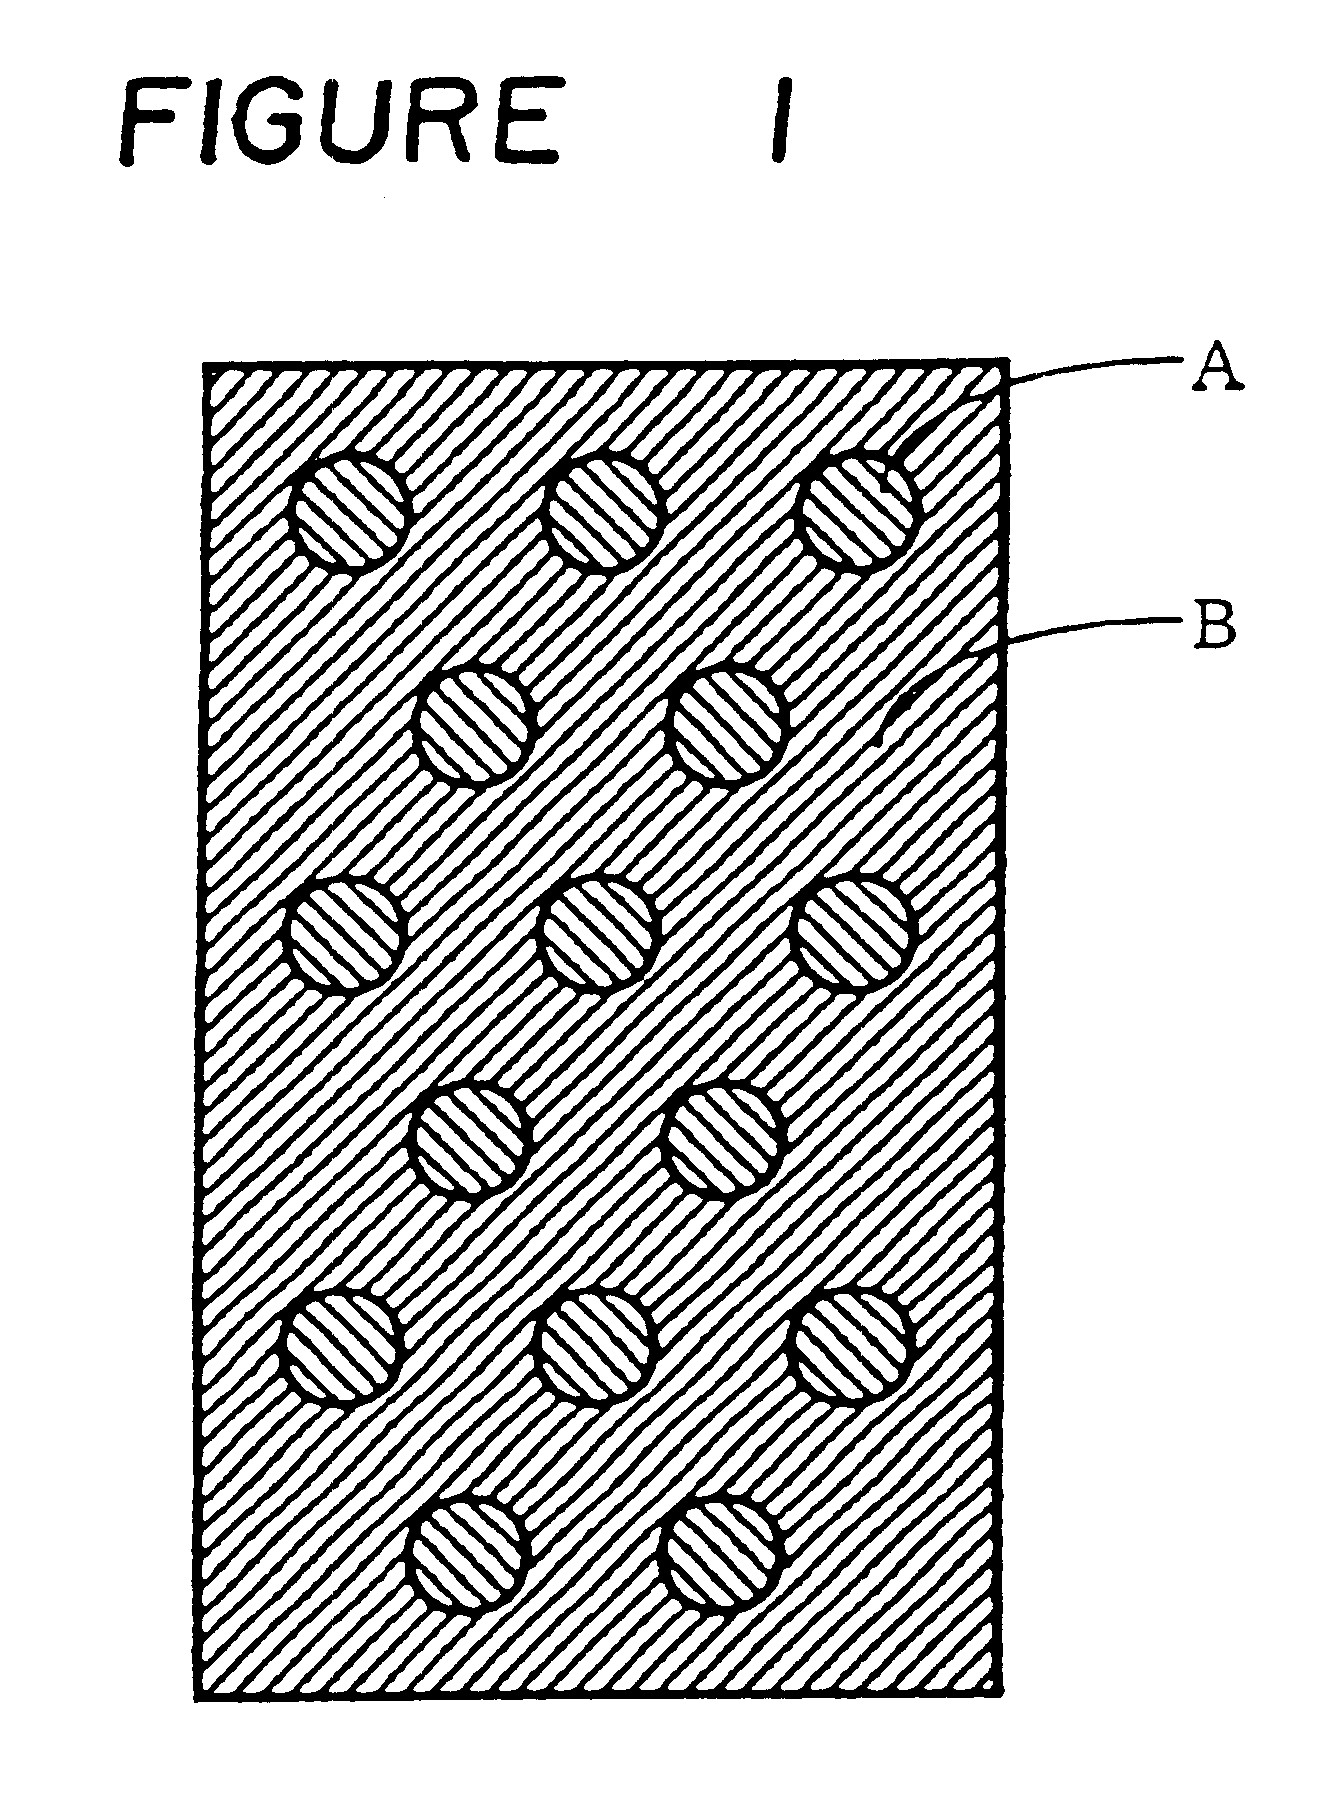 Apparatus for producing deionized water